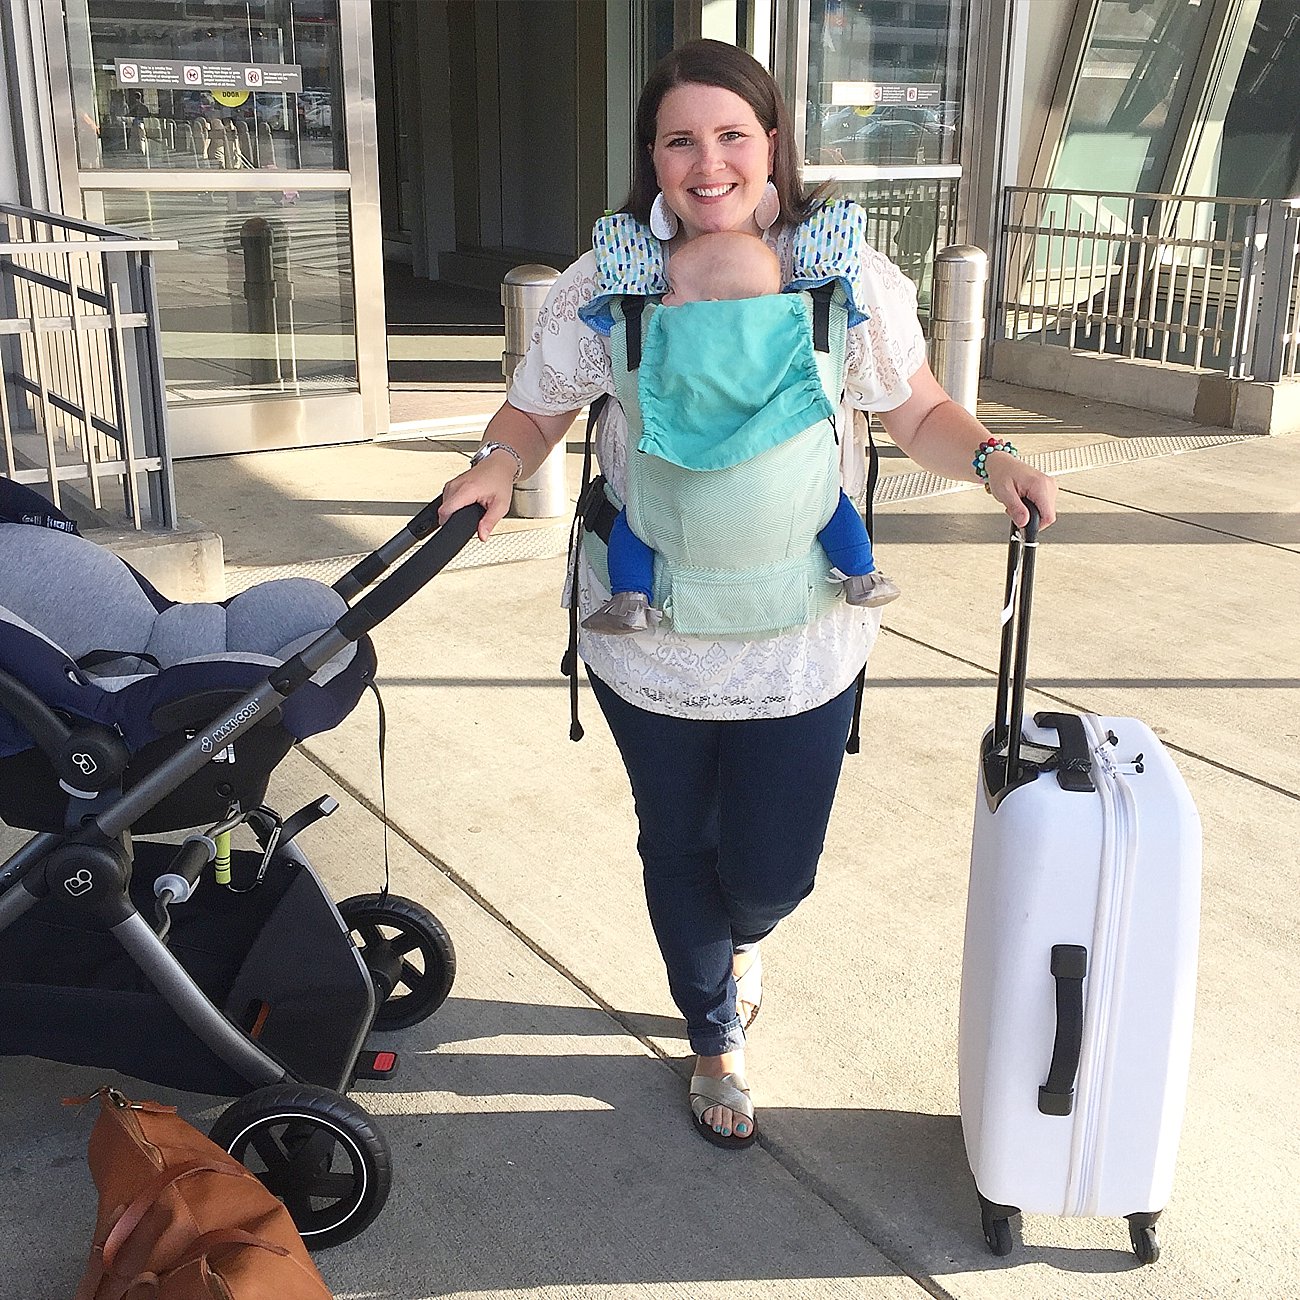 maxi cosi travel system review